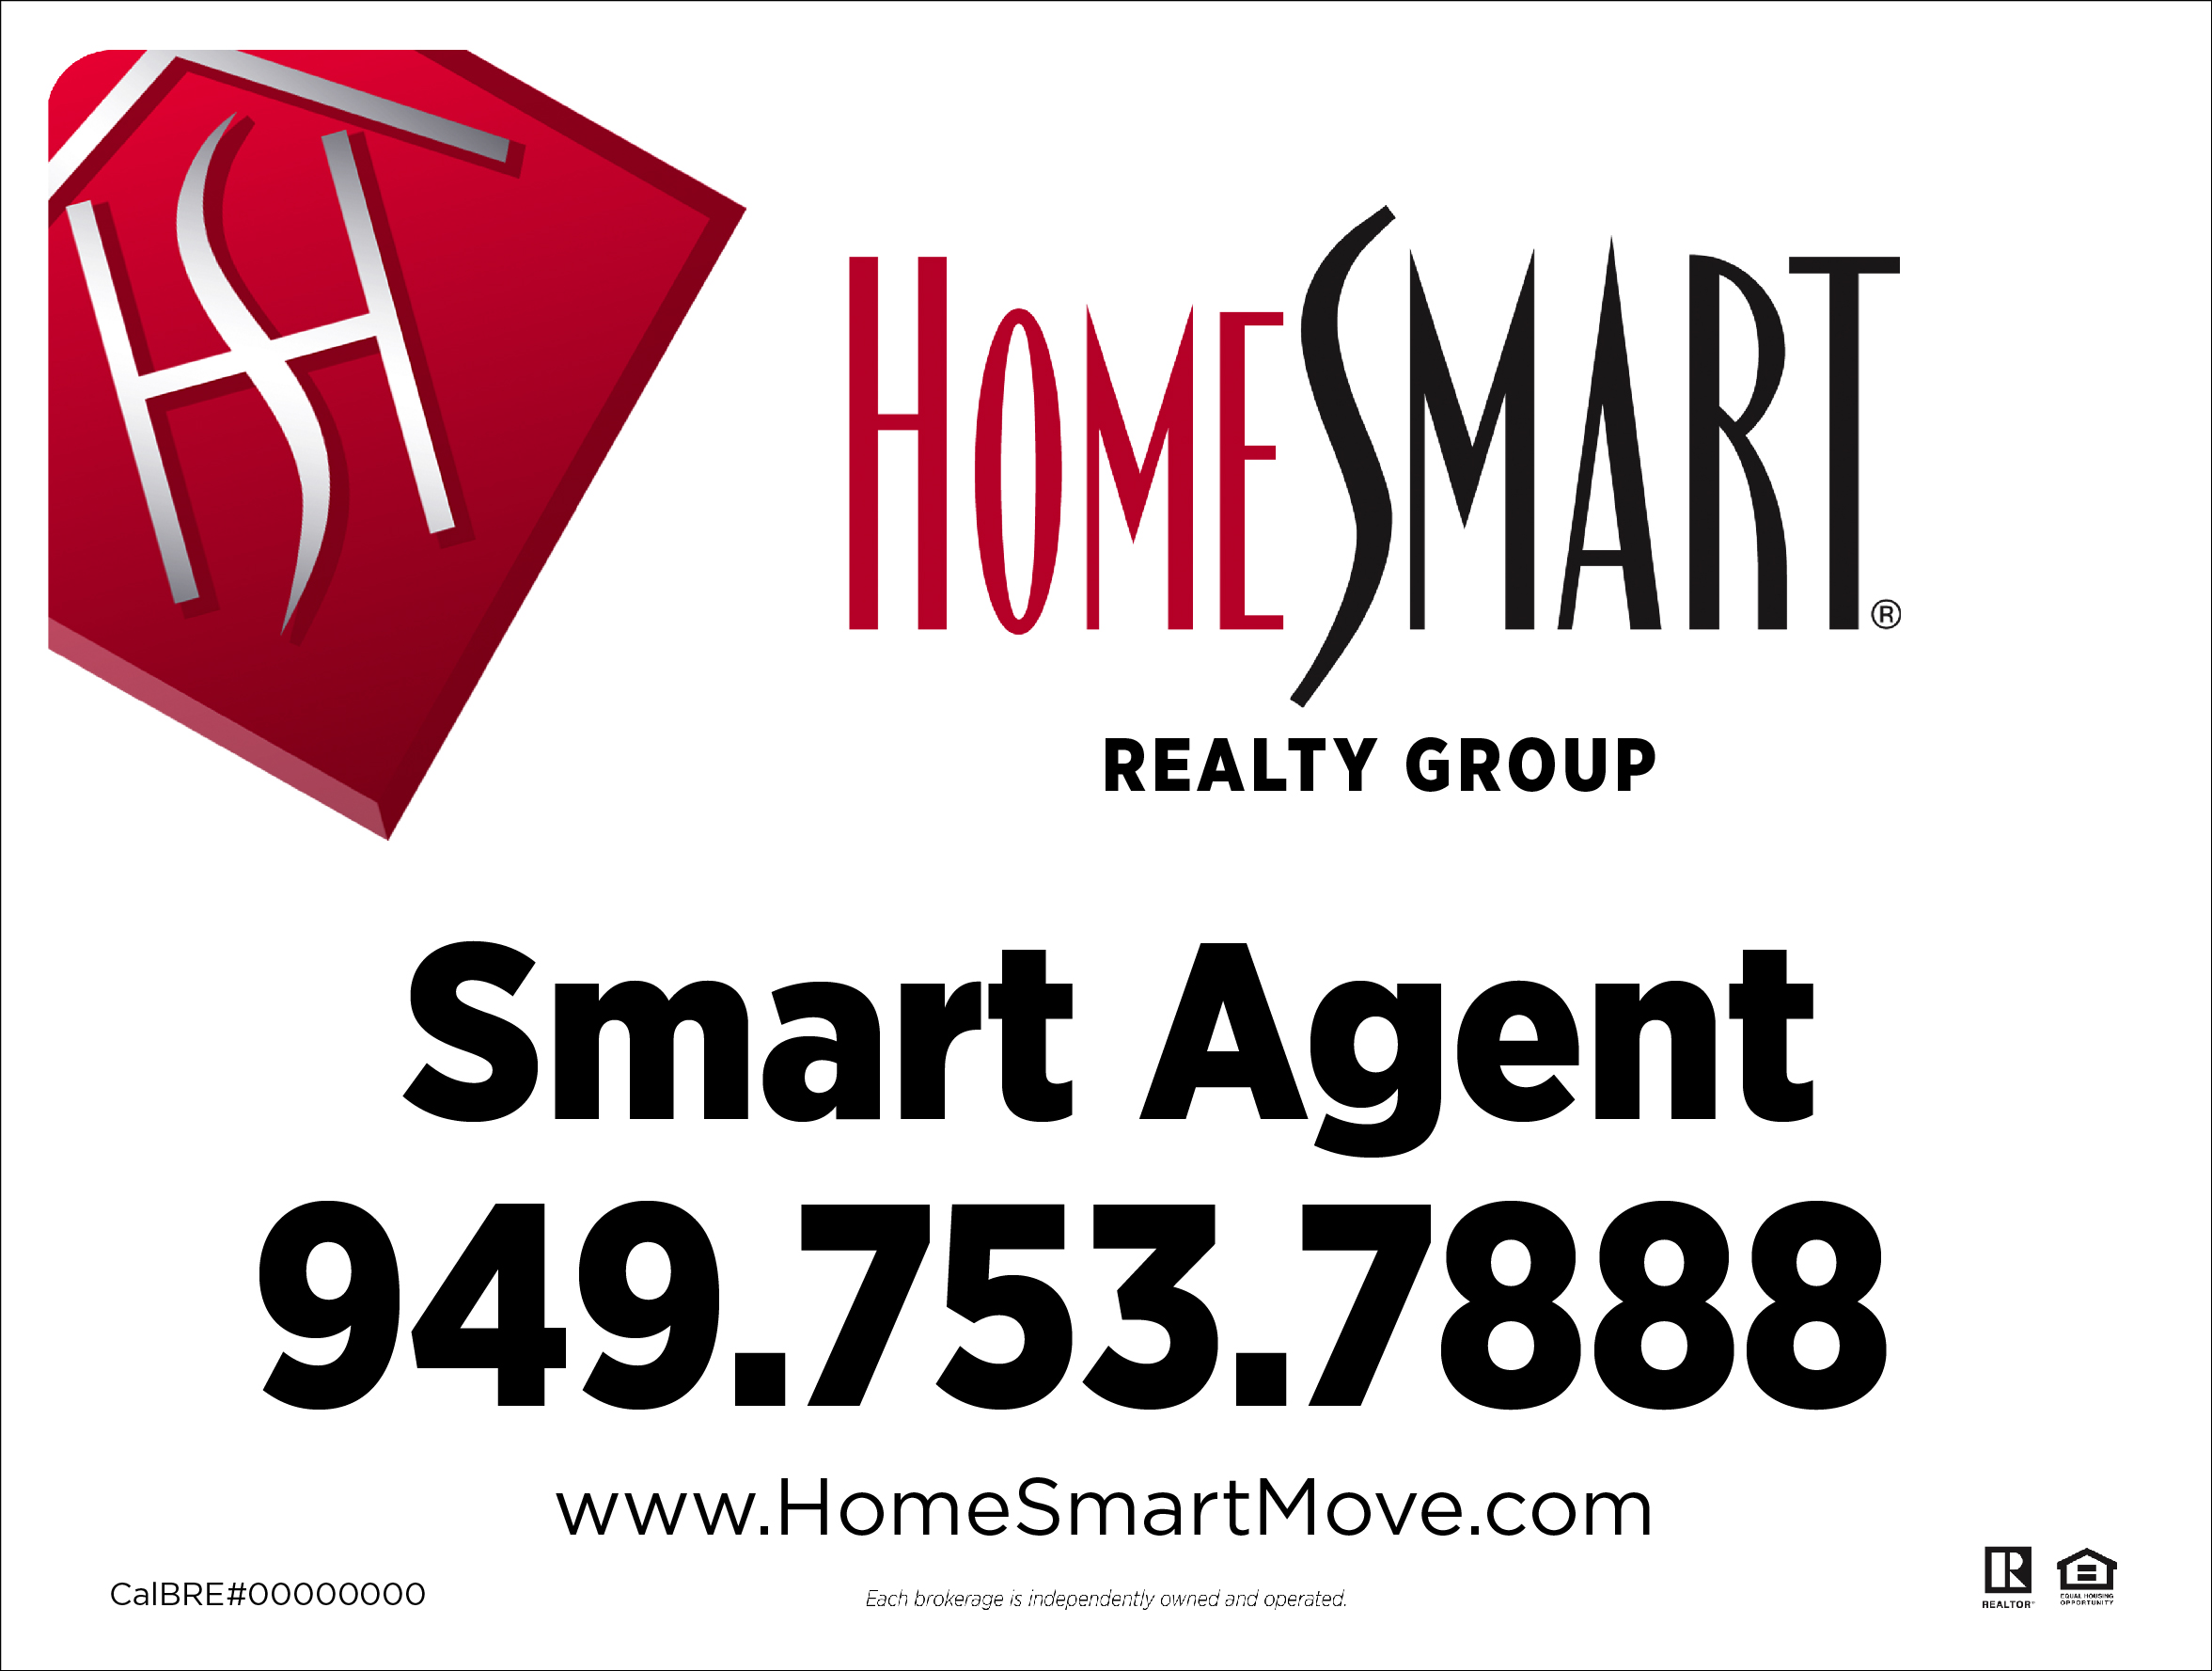 HomeSmart Realty Group for sale signs